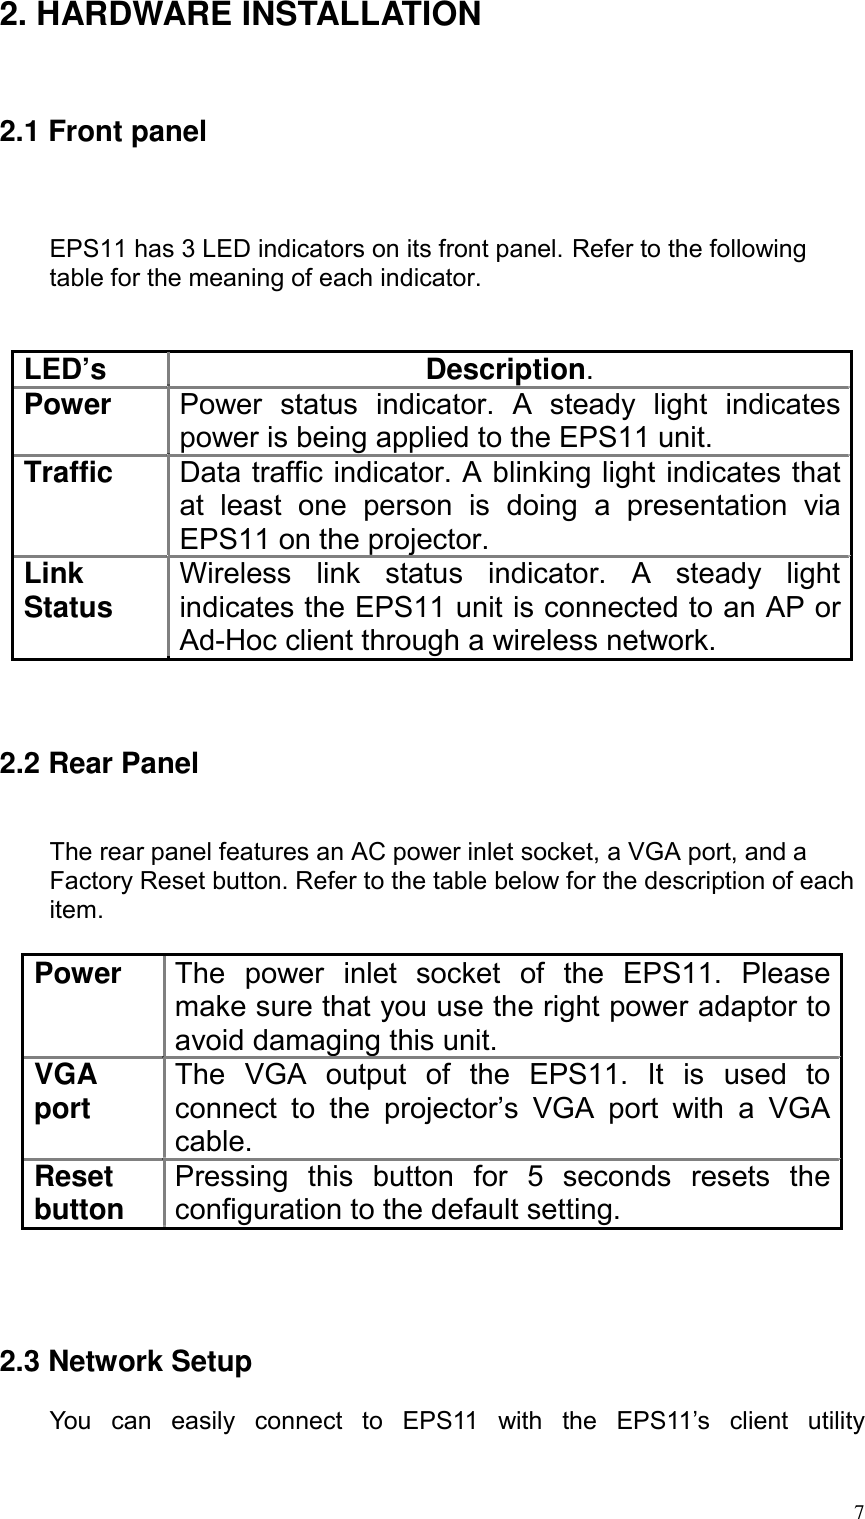 2. HARDWARE INSTALLATION   2.1 Front panel    EPS11 has 3 LED indicators on its front panel. Refer to the following table for the meaning of each indicator.   LED’s Description. Power  Power status indicator. A steady light indicates power is being applied to the EPS11 unit. Traffic  Data traffic indicator. A blinking light indicates that at least one person is doing a presentation via EPS11 on the projector. Link Status  Wireless link status indicator. A steady light indicates the EPS11 unit is connected to an AP or Ad-Hoc client through a wireless network.    2.2 Rear Panel   The rear panel features an AC power inlet socket, a VGA port, and a Factory Reset button. Refer to the table below for the description of each item.  Power  The power inlet socket of the EPS11. Please make sure that you use the right power adaptor to avoid damaging this unit. VGA port  The VGA output of the EPS11. It is used to connect to the projector’s VGA port with a VGA cable. Reset button  Pressing this button for 5 seconds resets the configuration to the default setting.     2.3 Network Setup  You can easily connect to EPS11 with the EPS11’s client utility   7